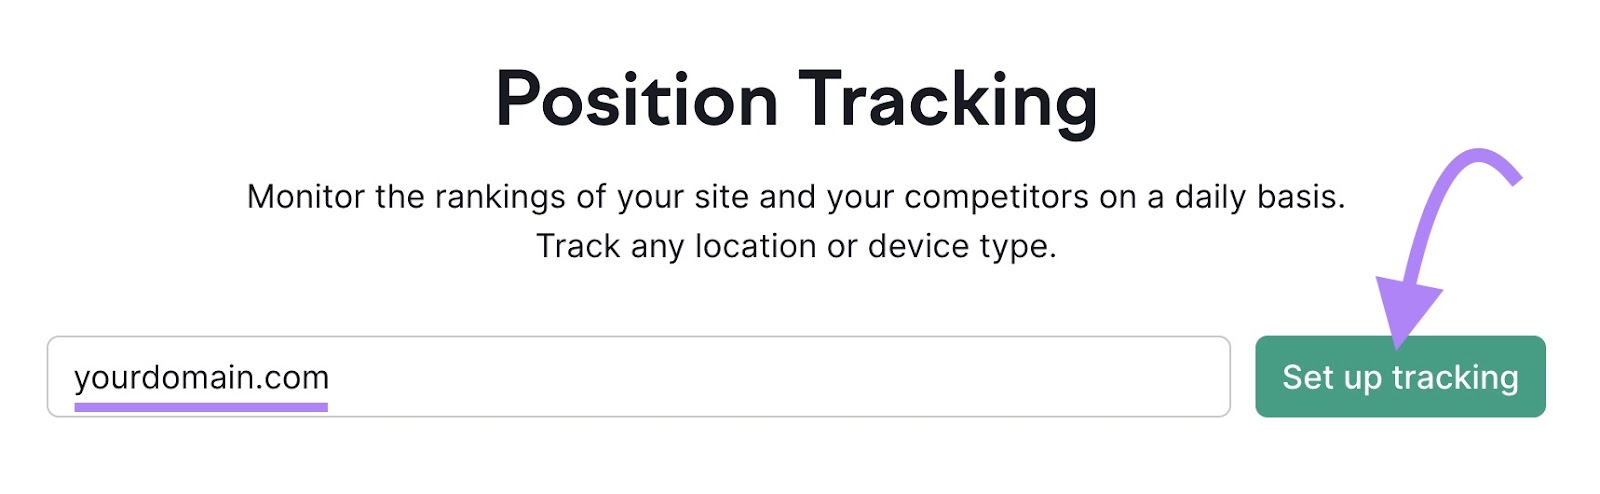 "yourdomain.com" entered into the Position Tracking tool search bar